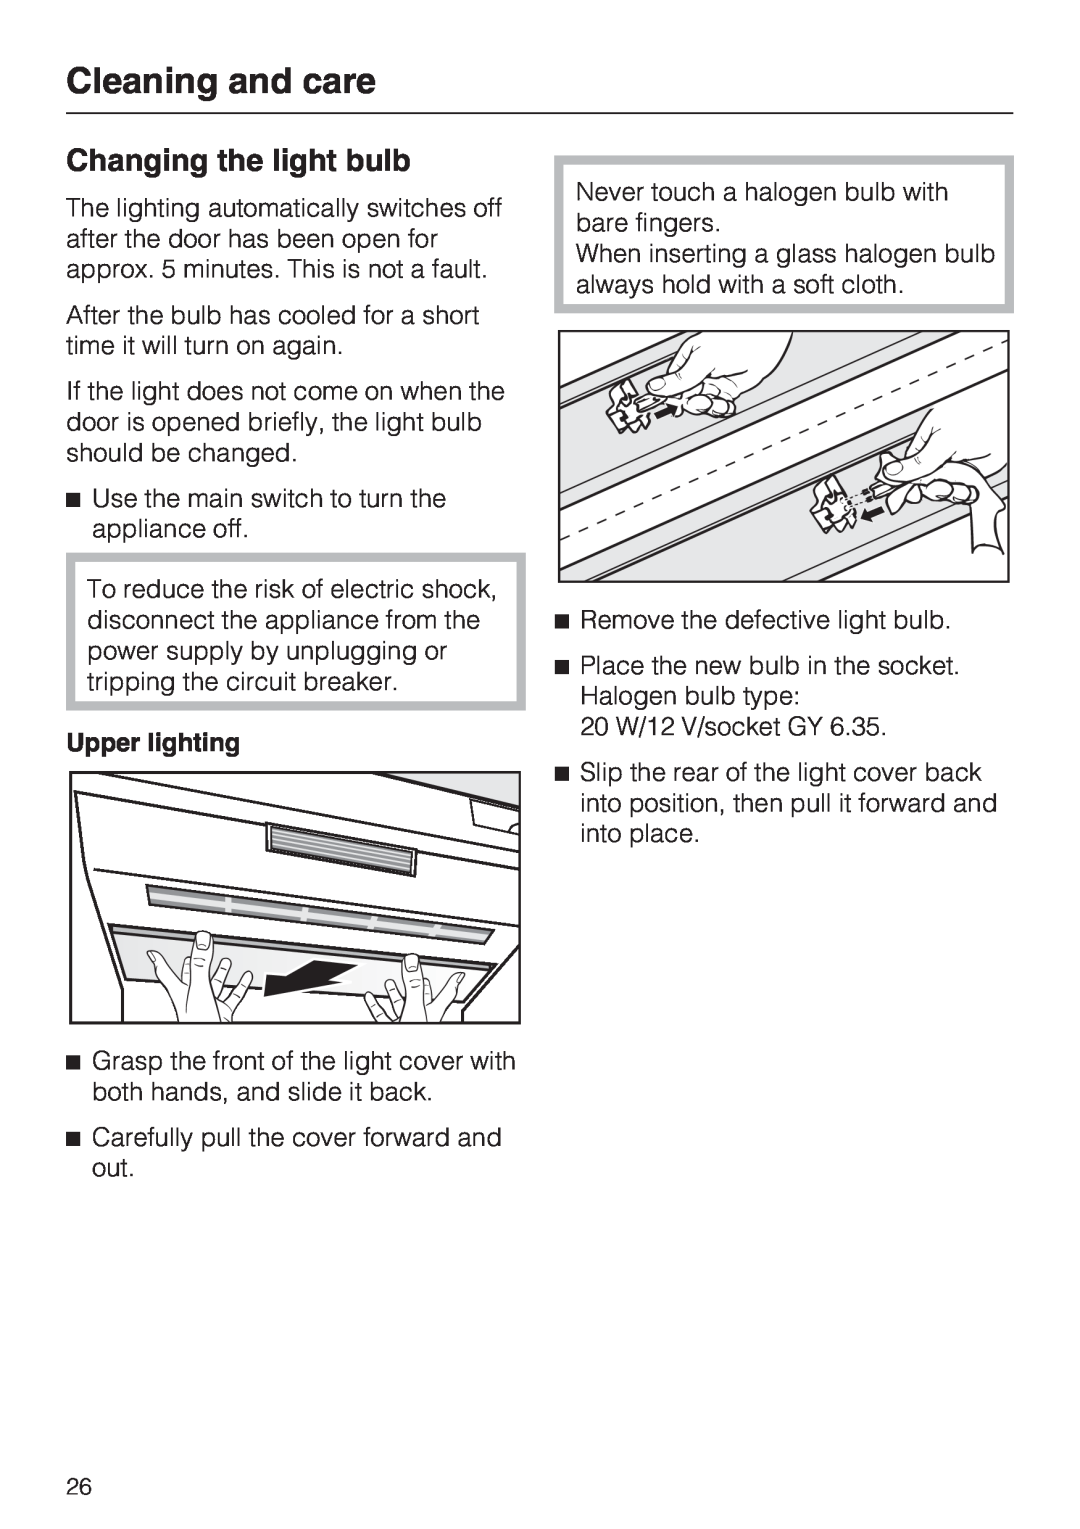 Miele F1411VI installation instructions Changing the light bulb, Cleaning and care, Upper lighting 